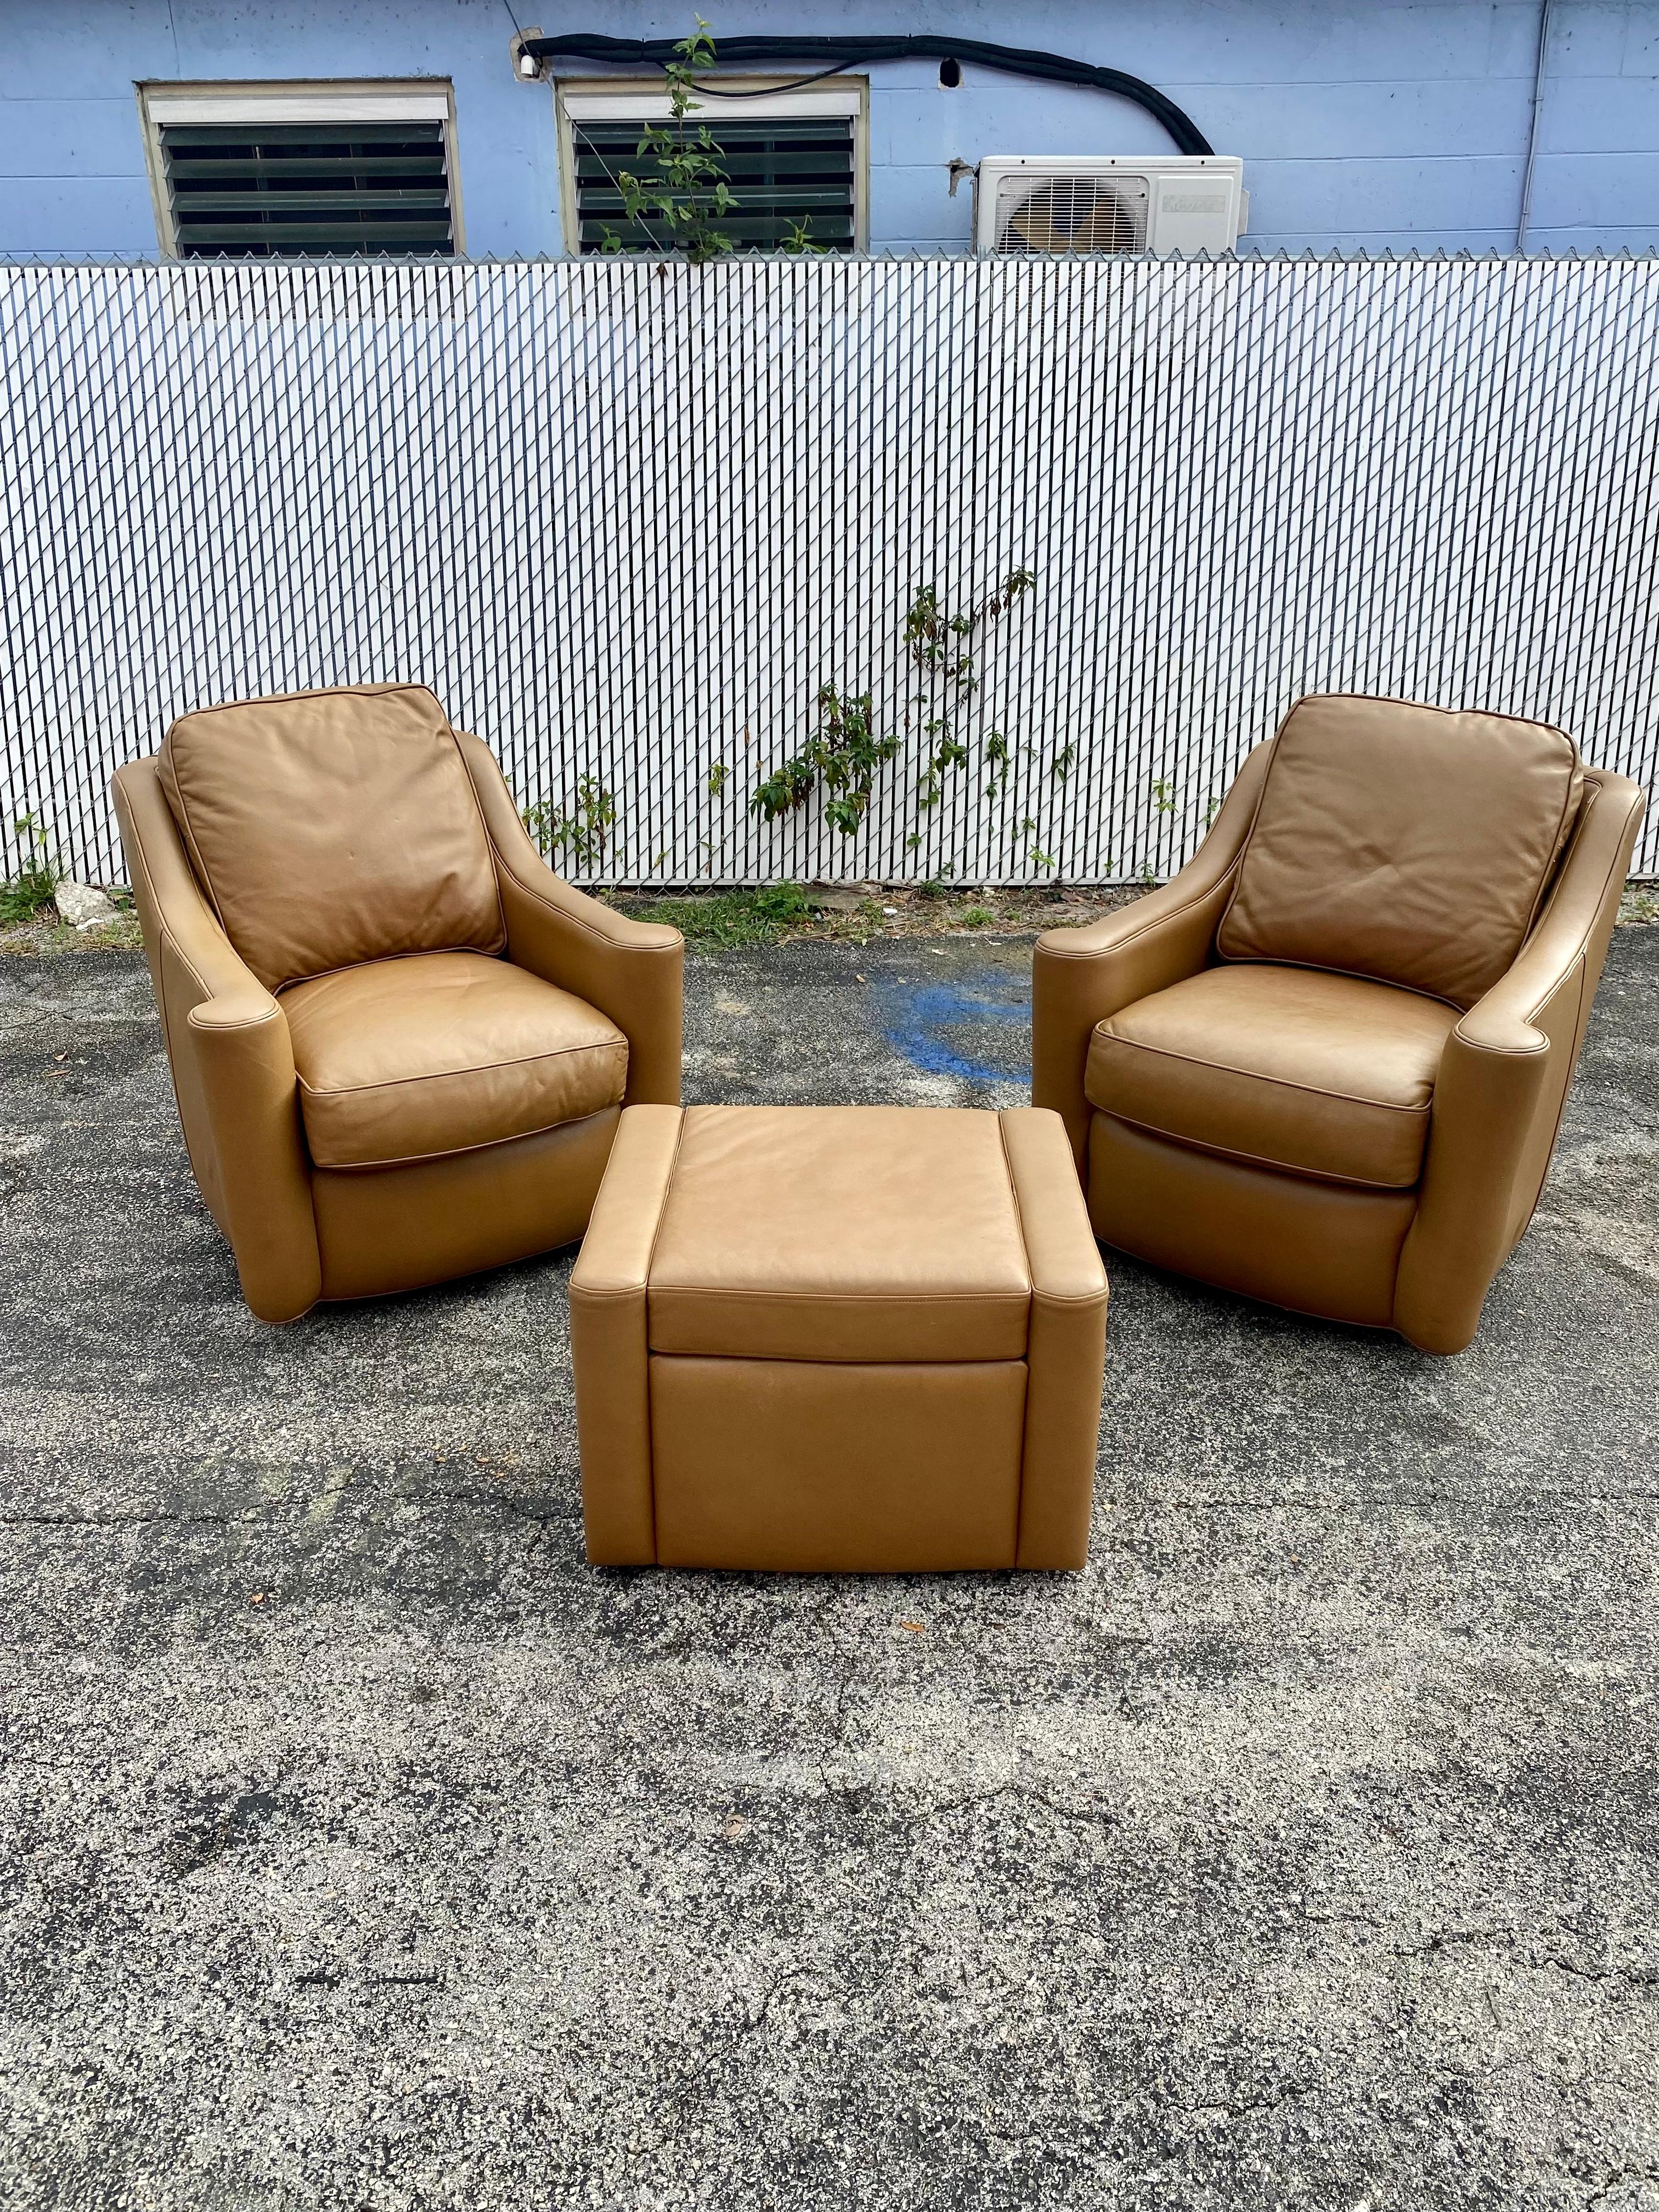 1990s Hancock & Moore Leather Swivel Chairs and Ottoman, Set of 3 For Sale 6